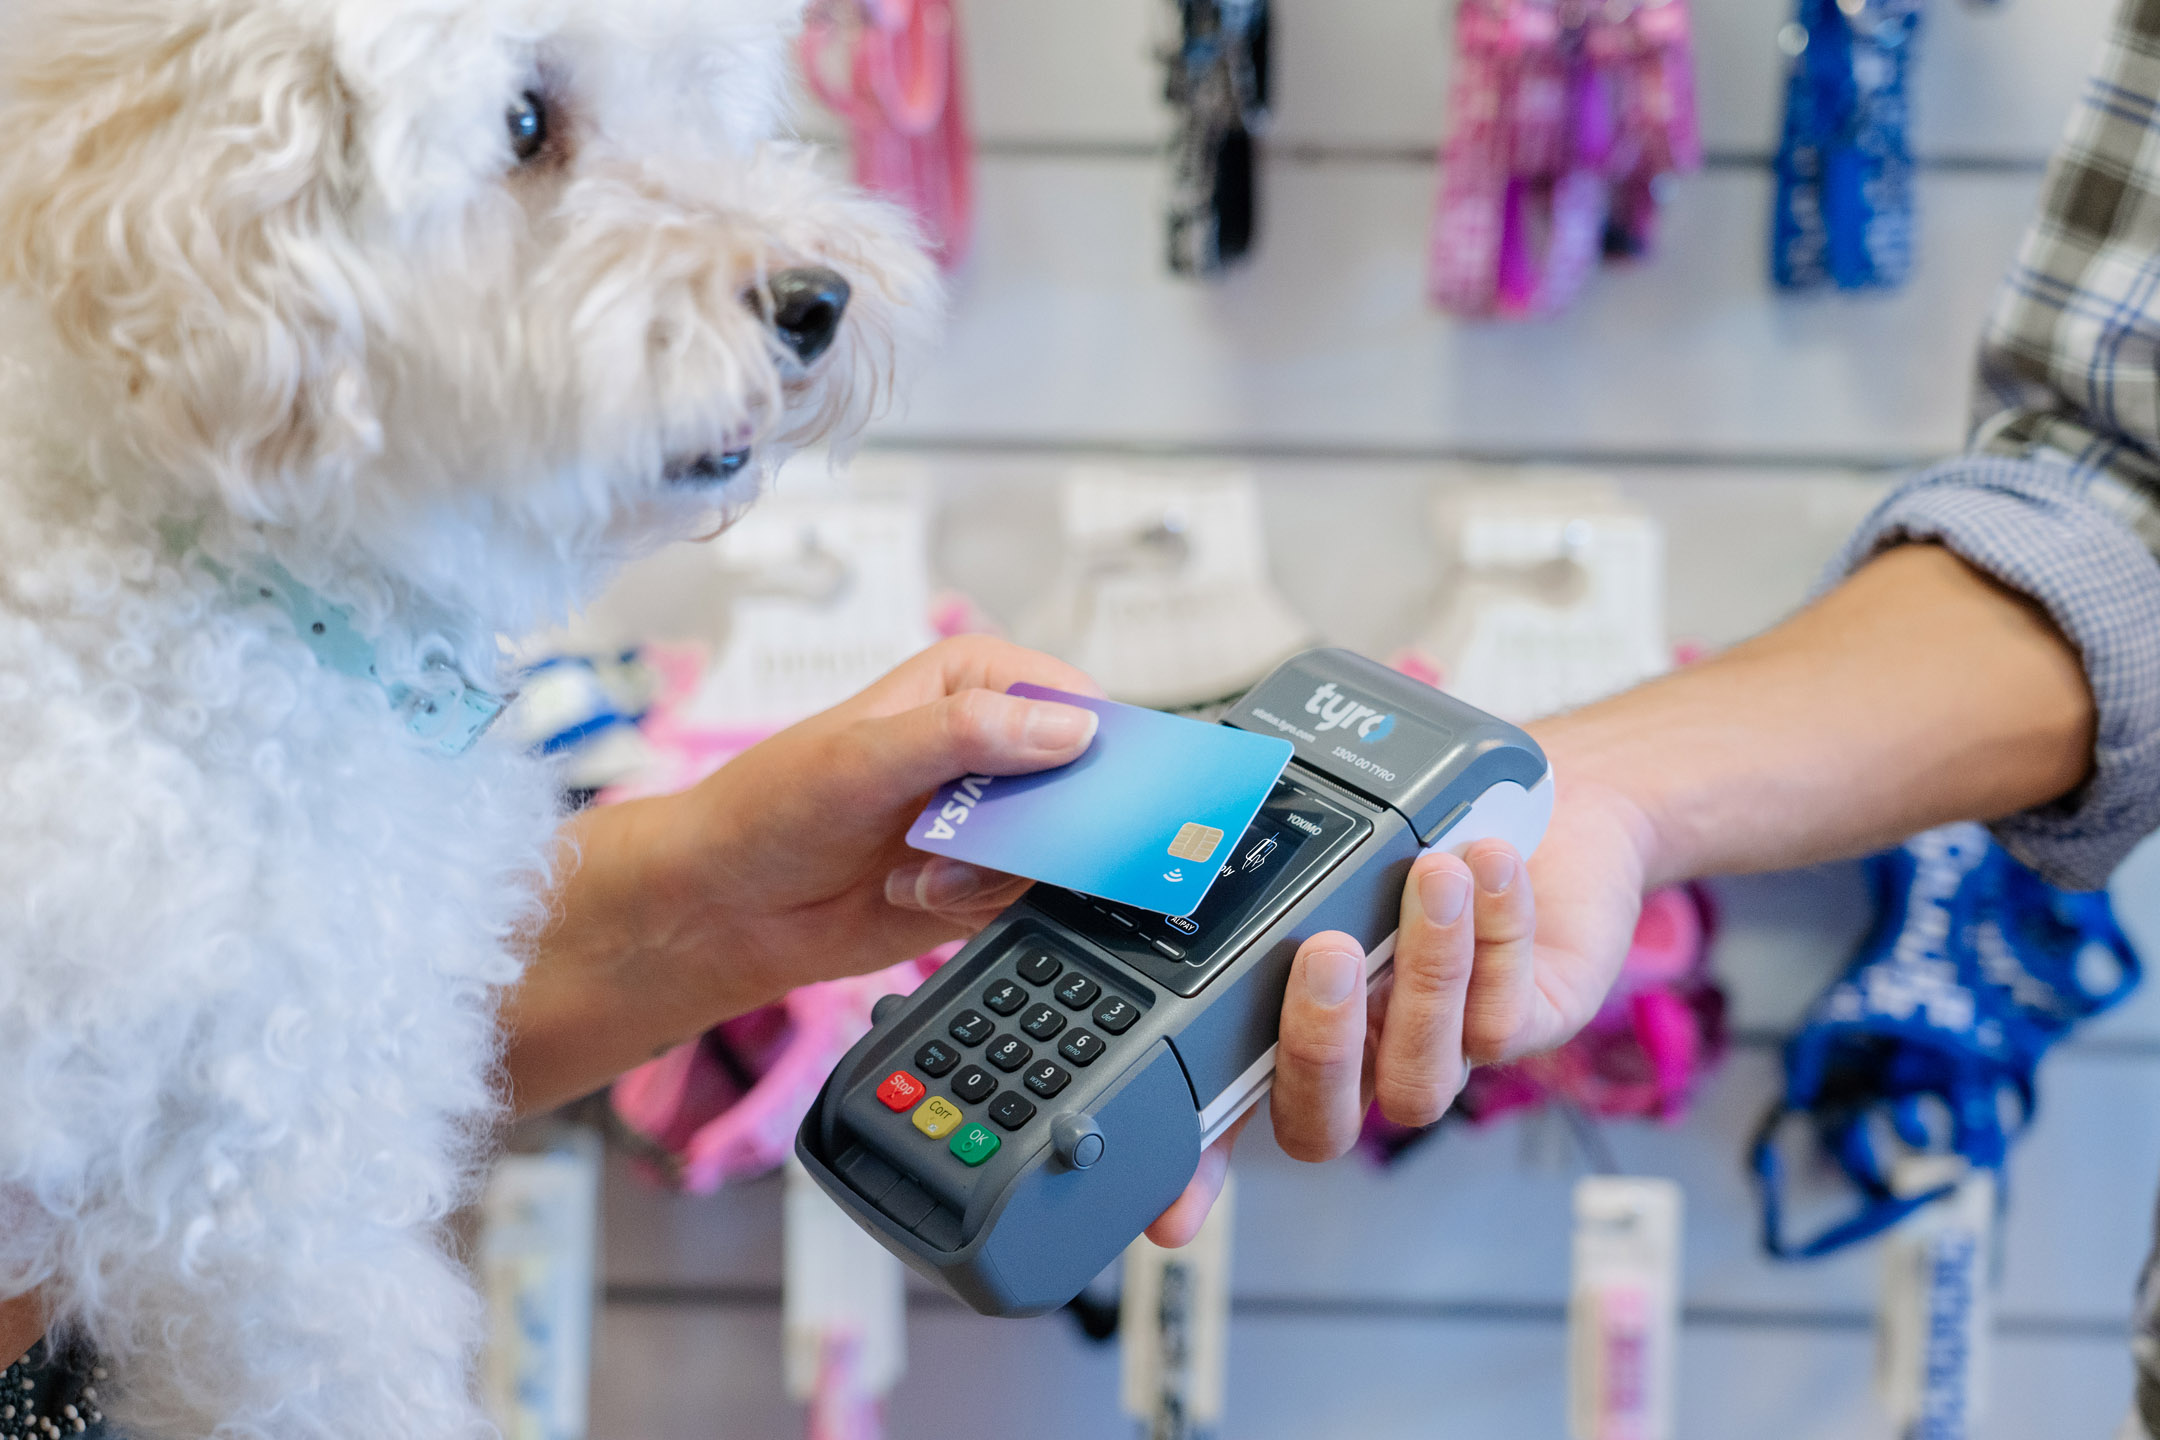 contactless-payment-tyro-mobile-eftpos